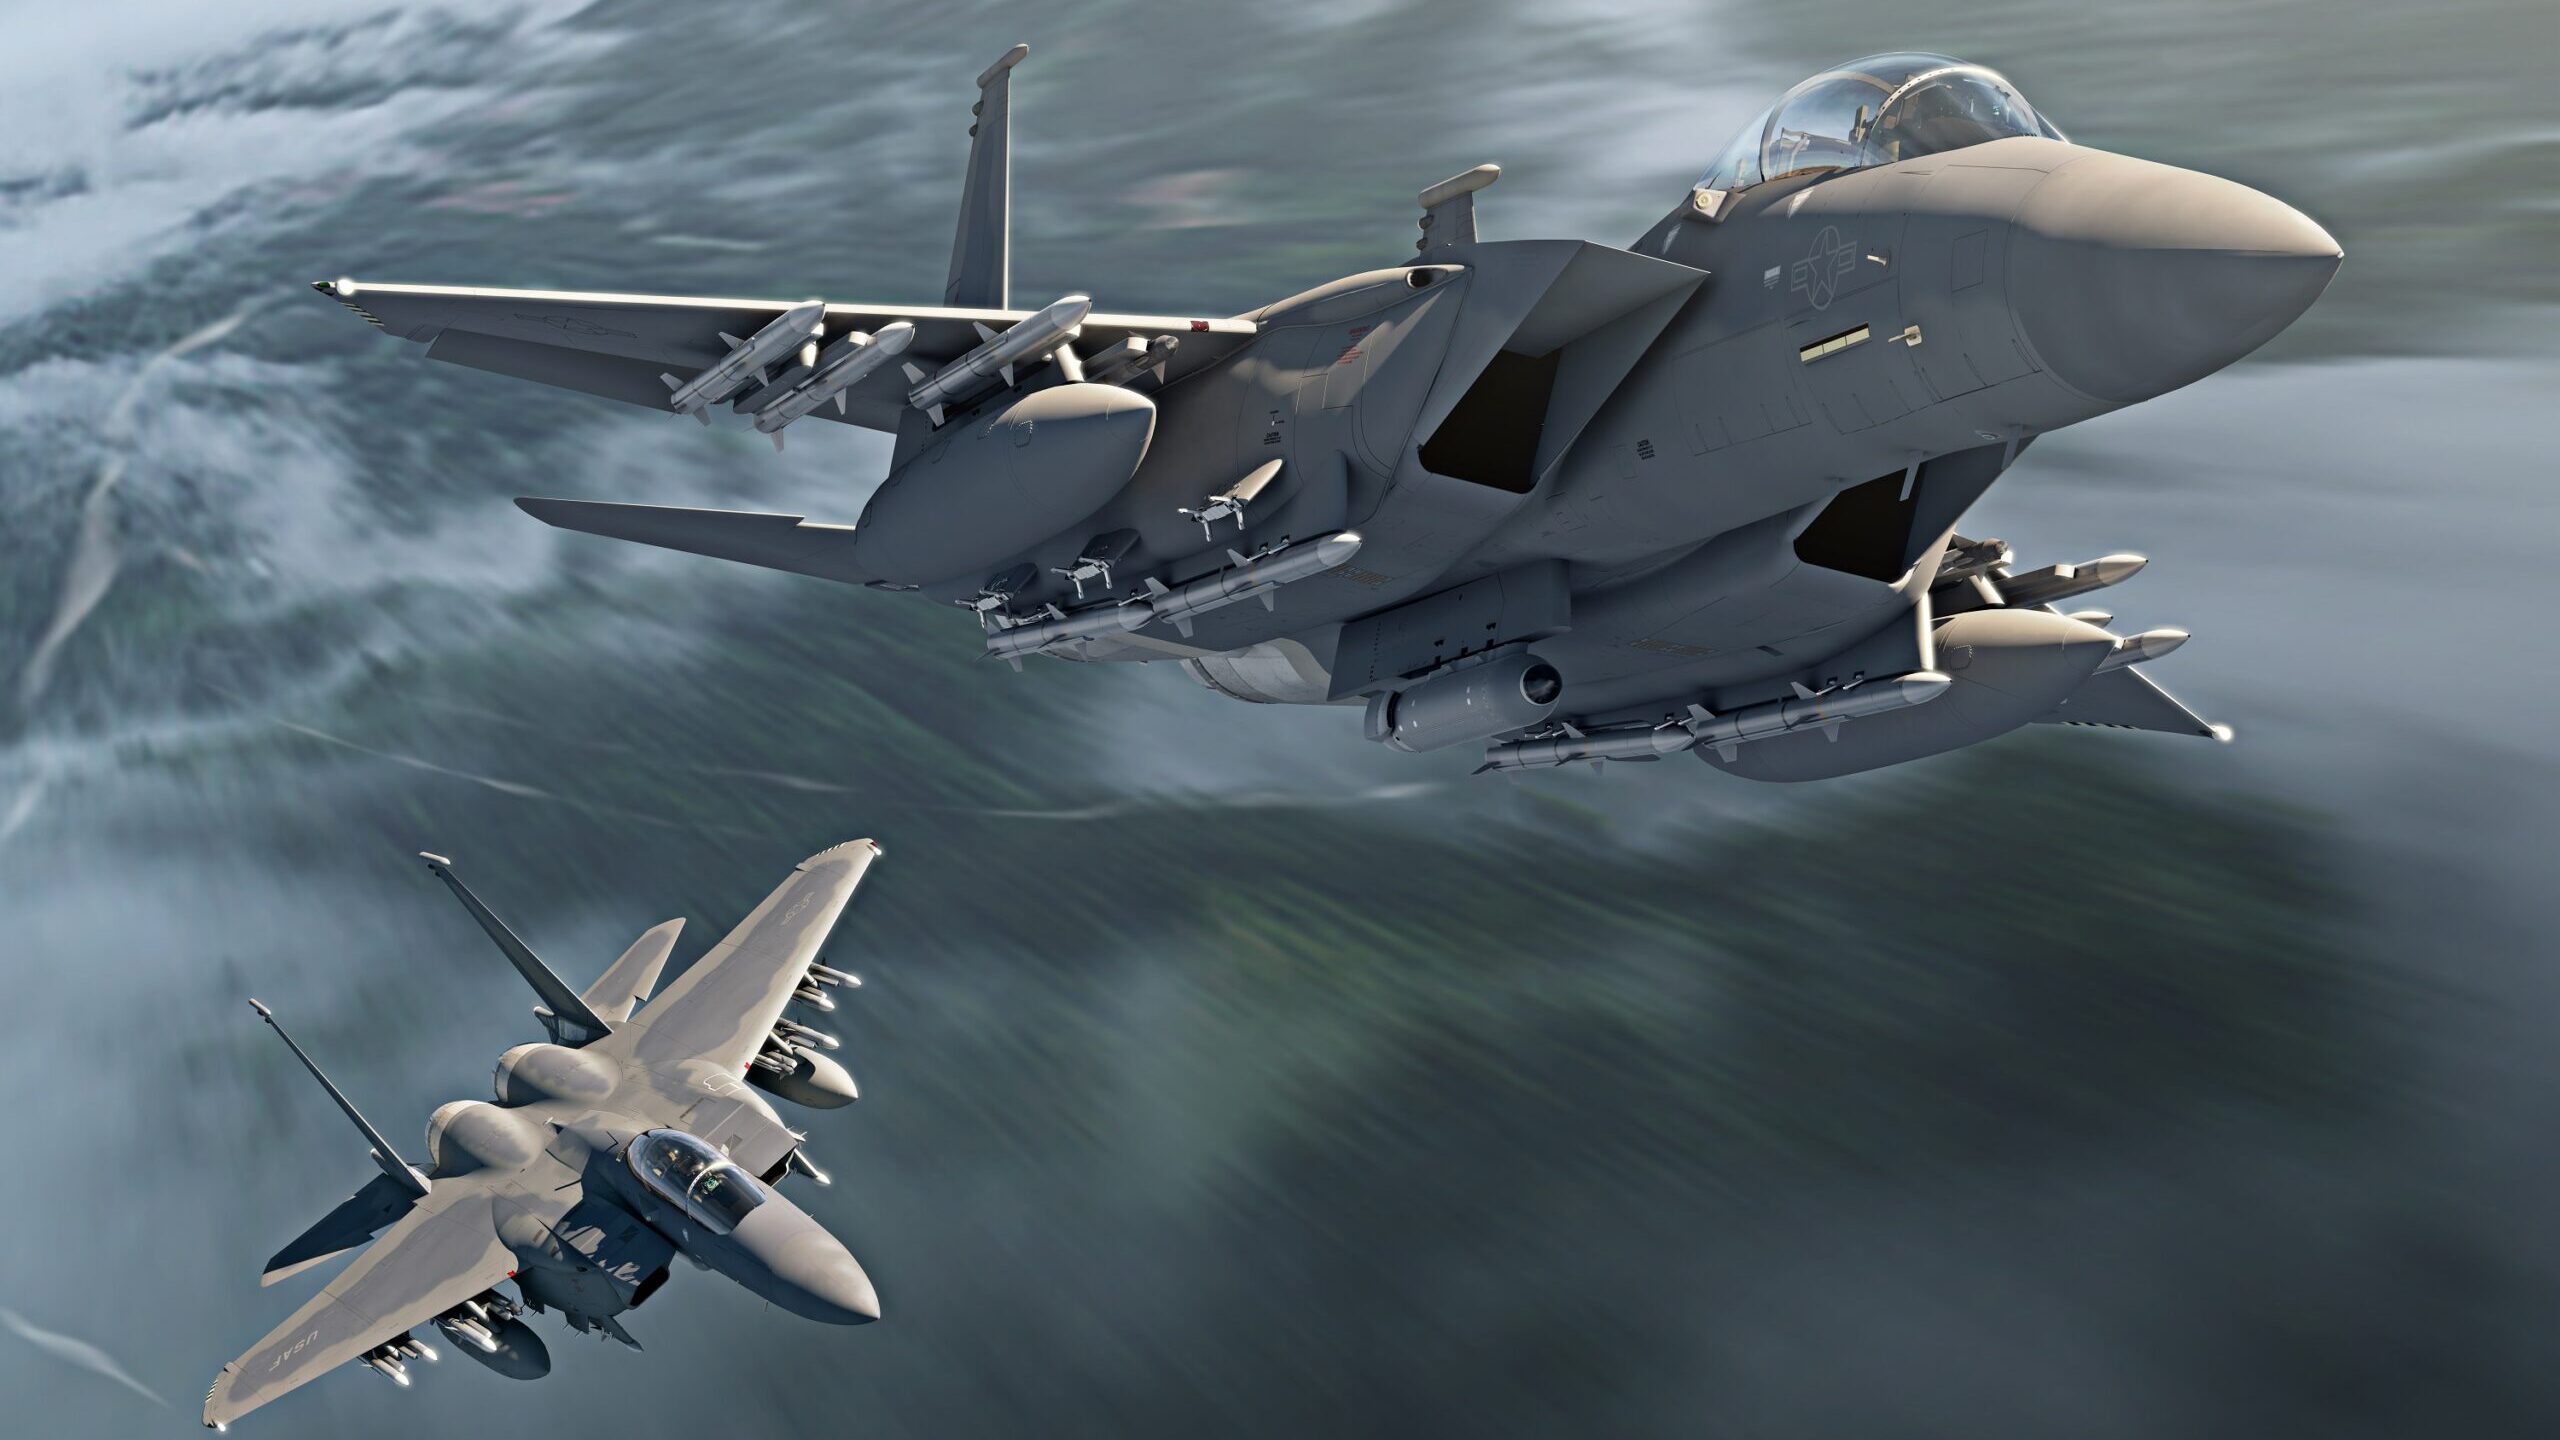 Boeing offers F-15EX for Poland, but details are scant